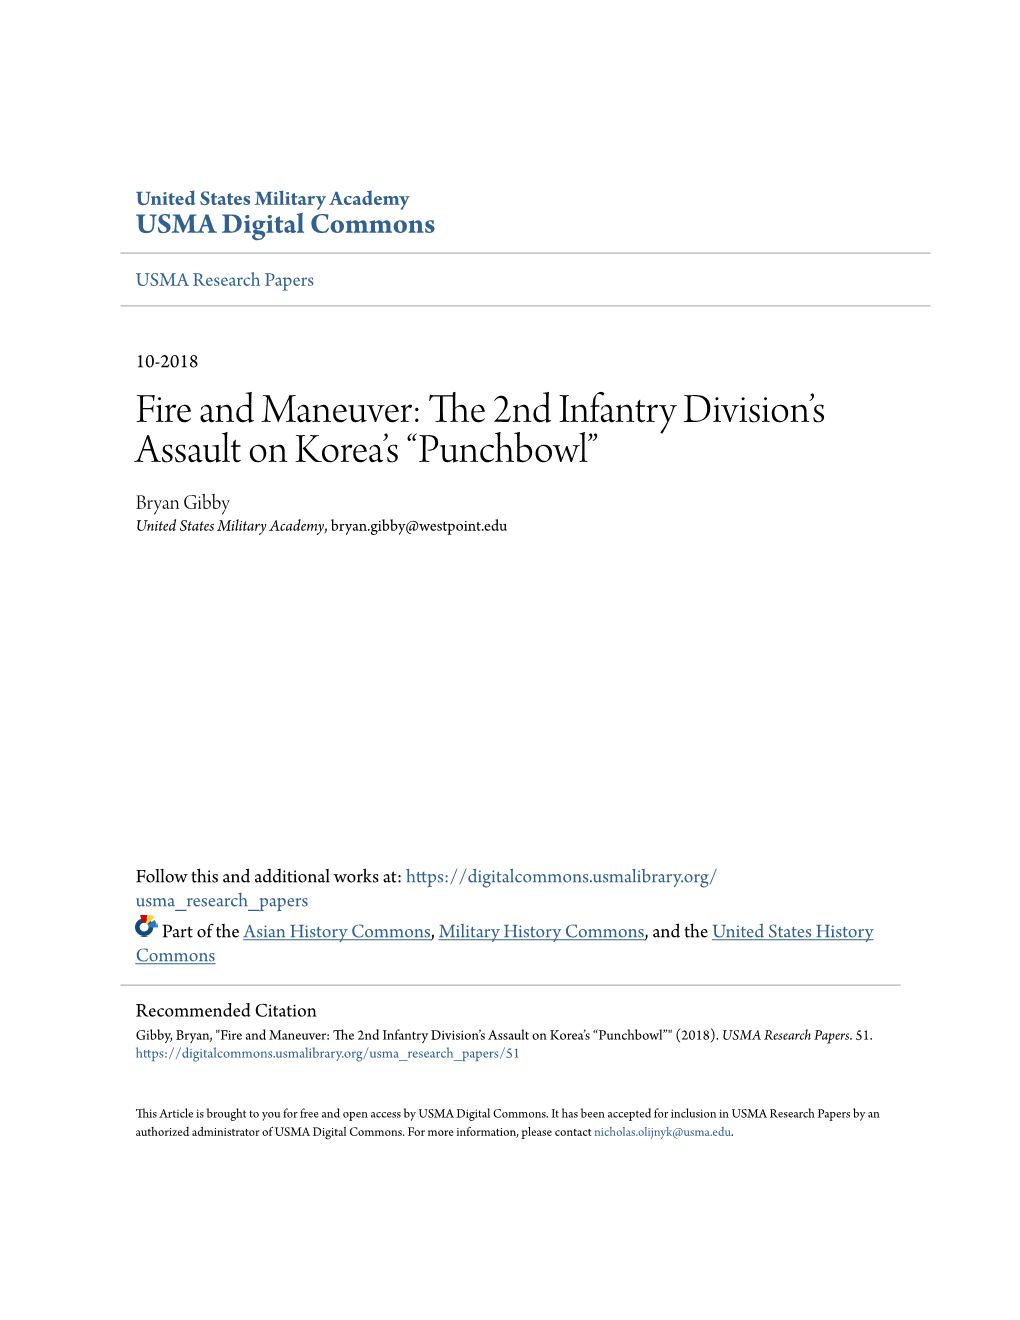 The 2Nd Infantry Division's Assault on Korea's